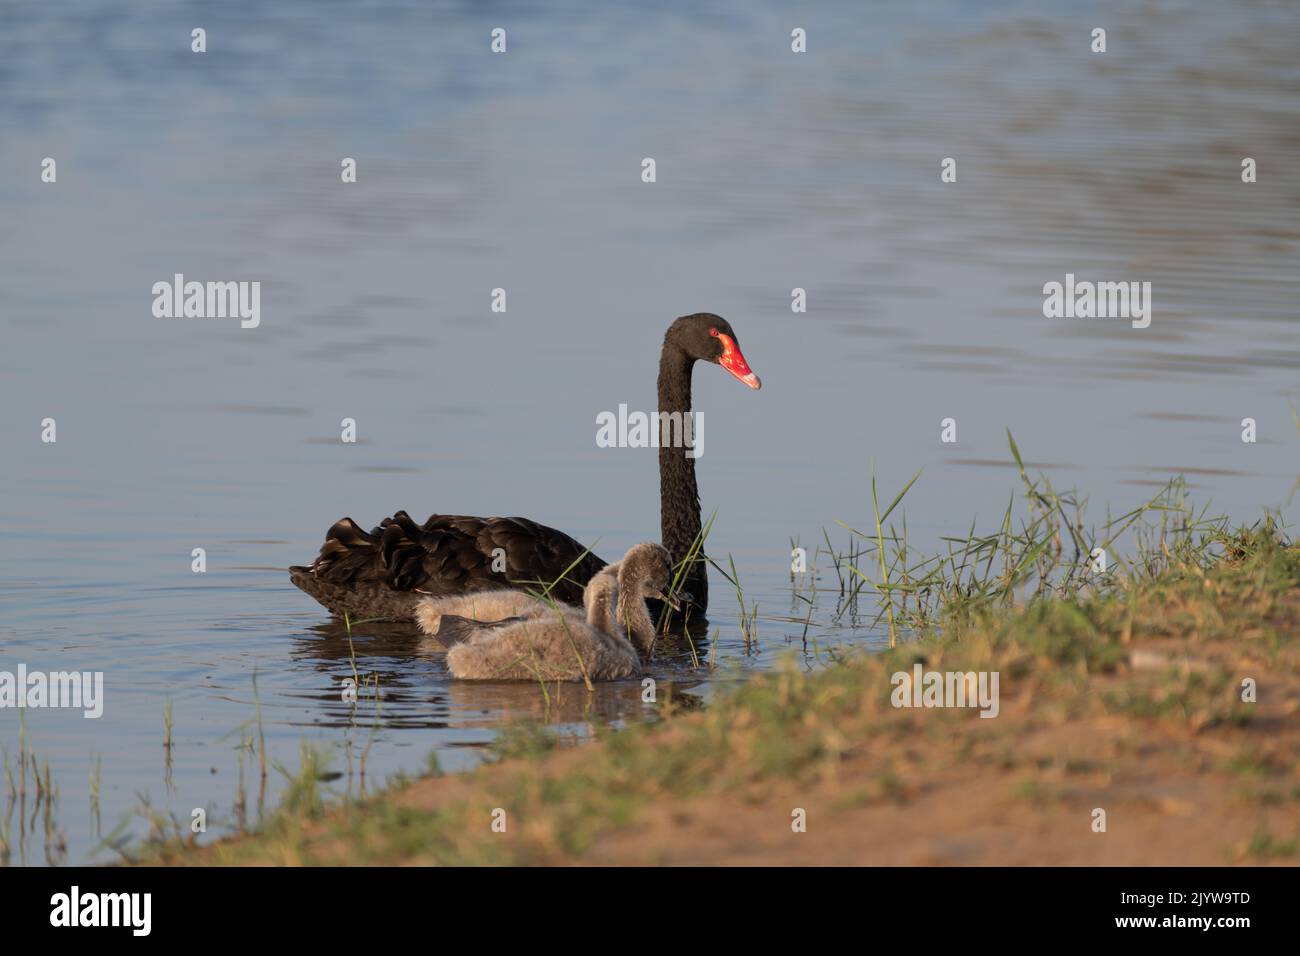 A Black Swan (Cygnus atratus) mother and her cygnets swimming close to the water's edge at the Al Qudra lakes in Dubai, United Arab Emirates. Stock Photo